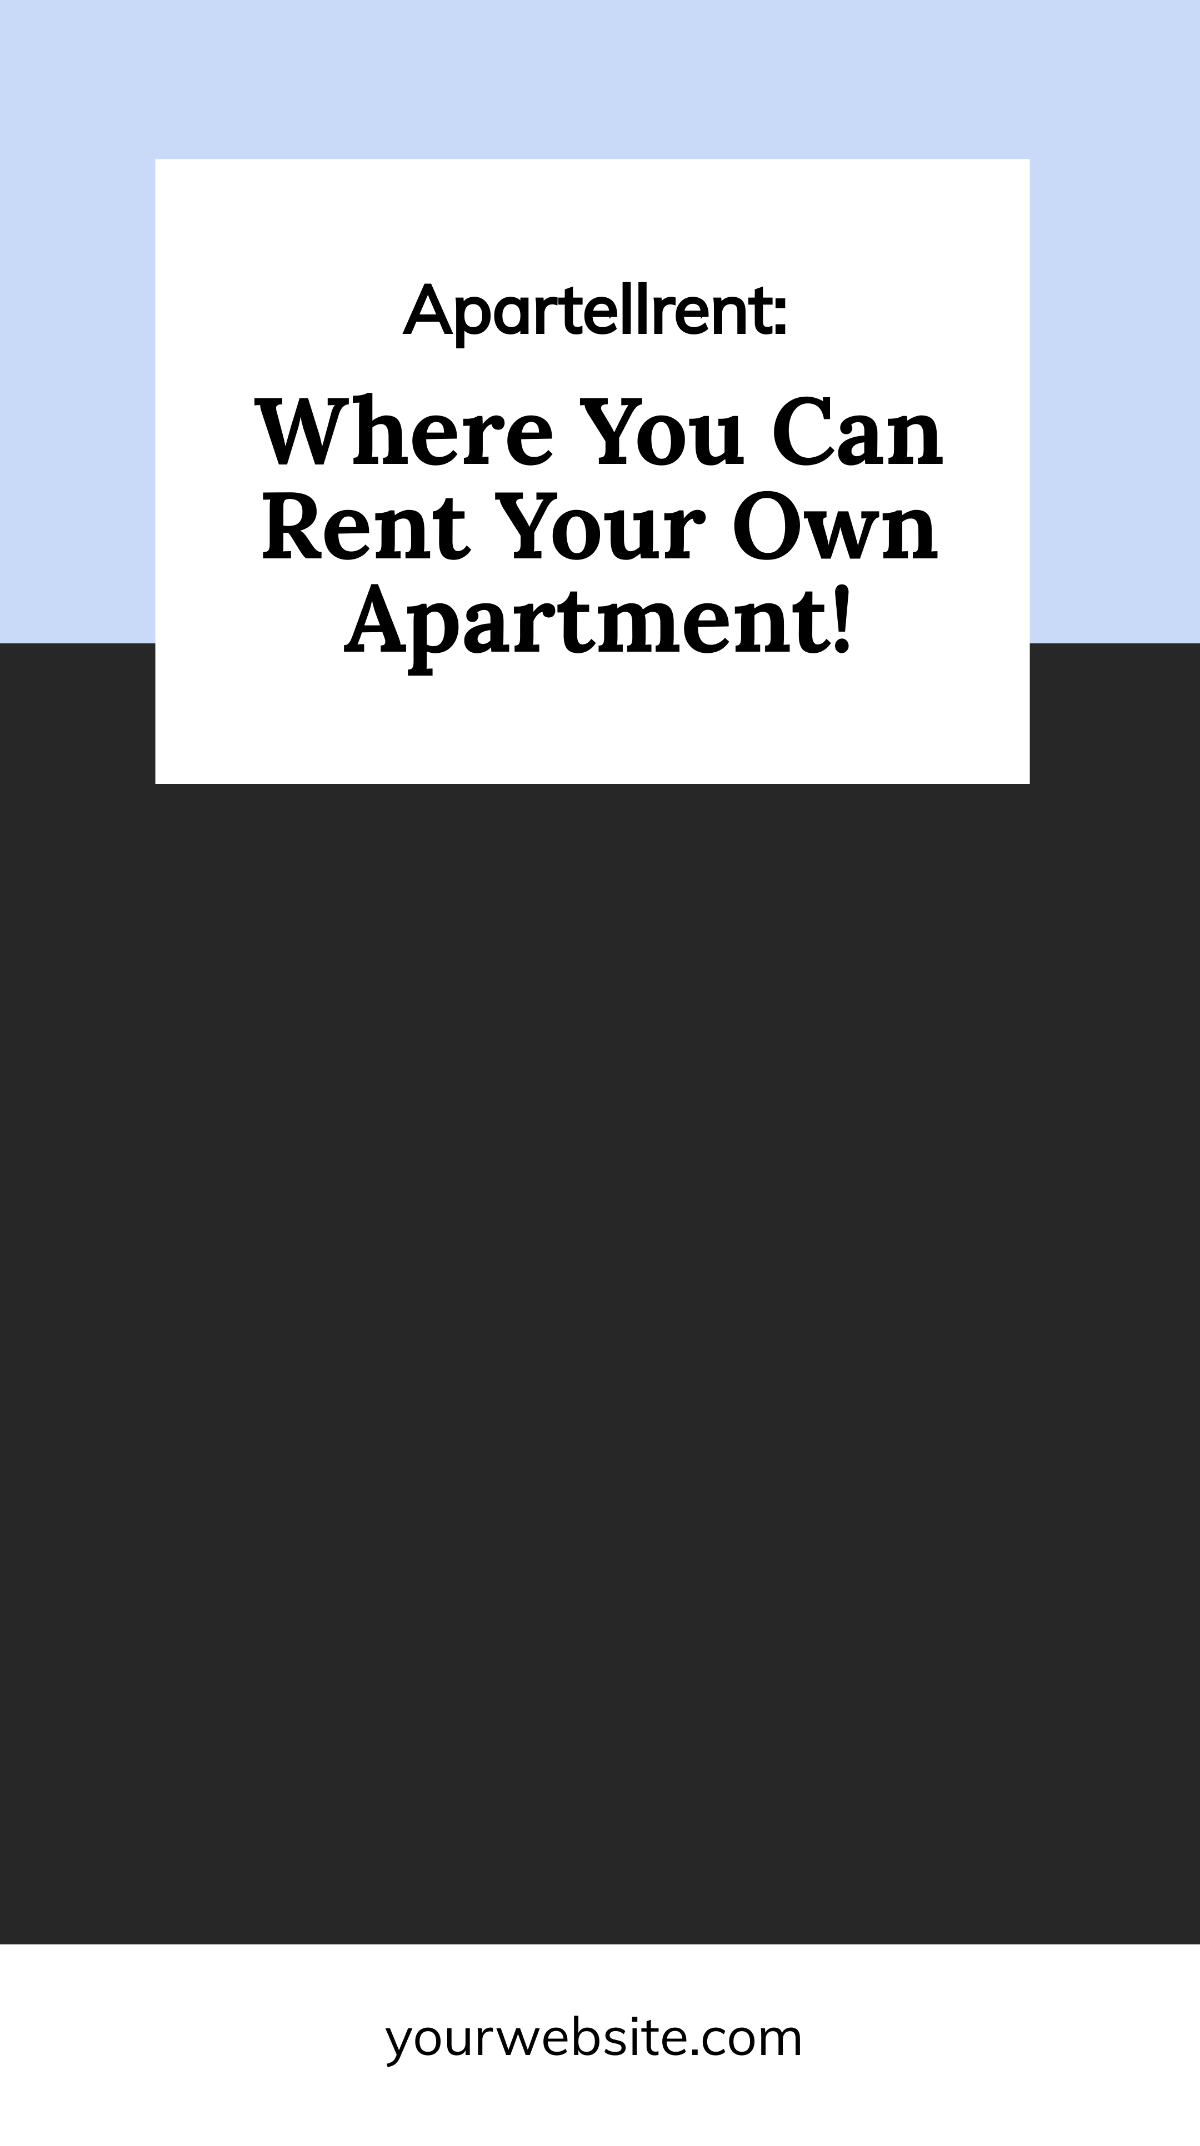 Apartment Rental Snapchat Geofilter Template